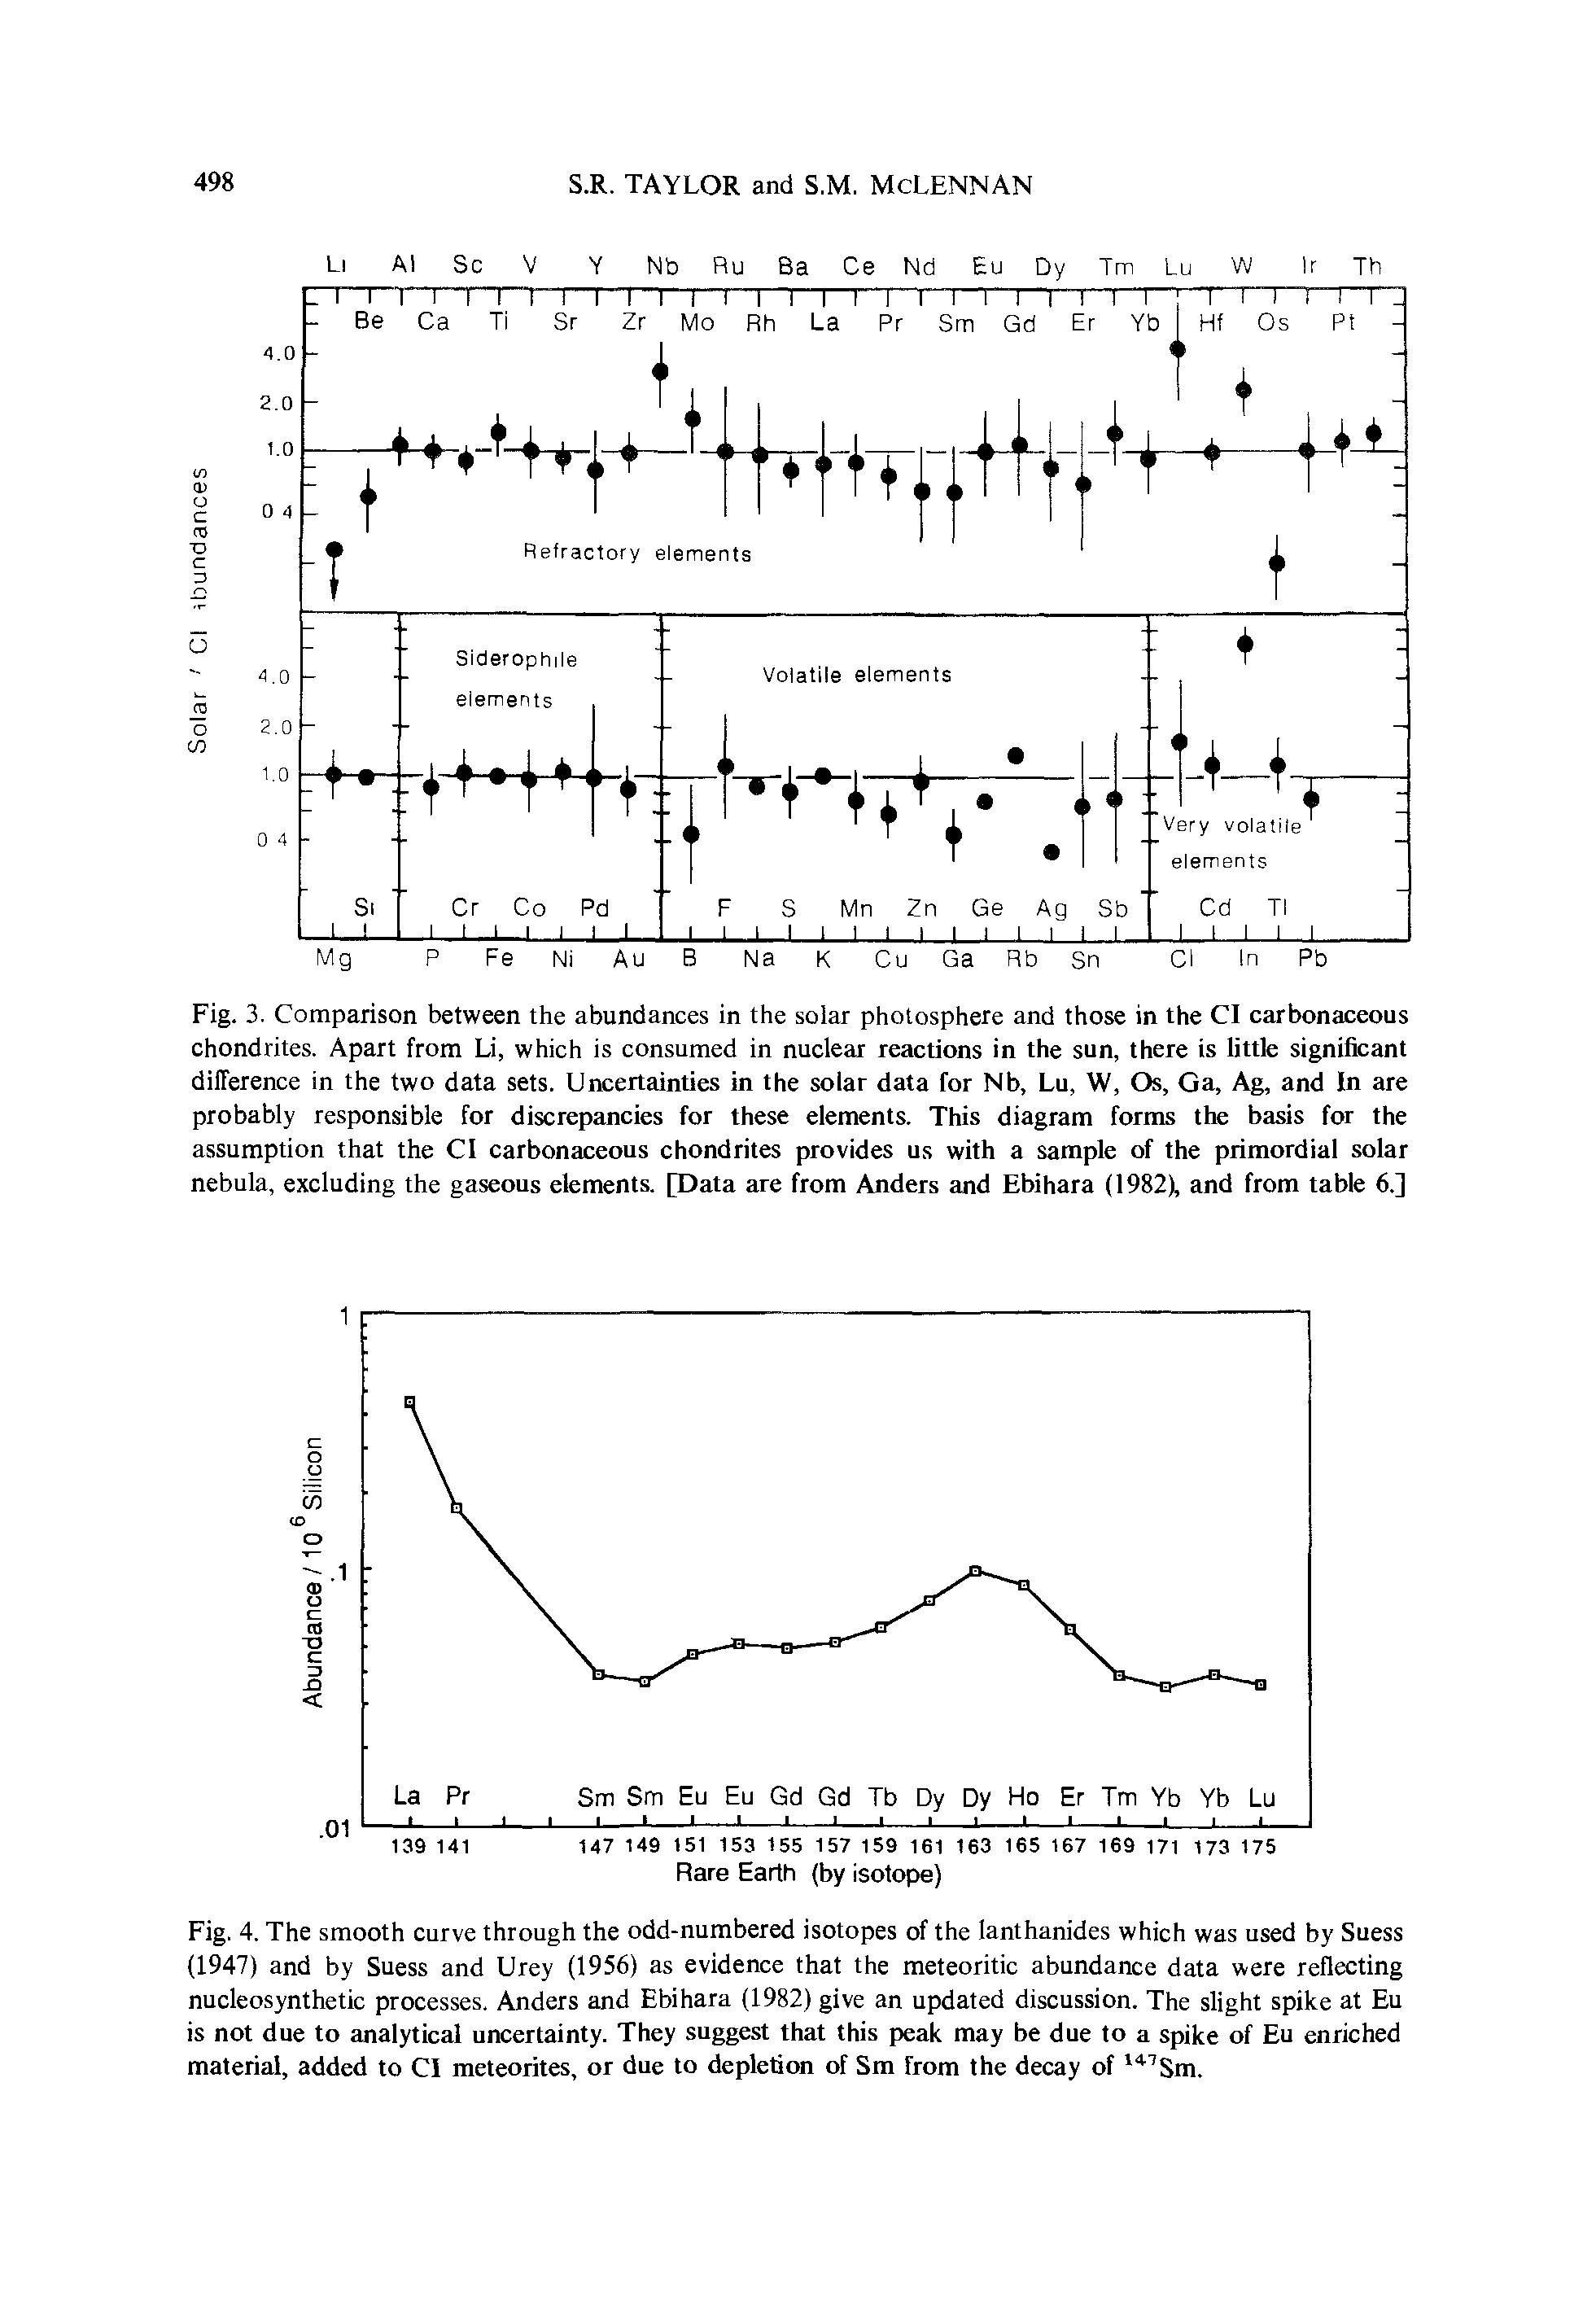 Fig. 3. Comparison between the abundances in the solar photosphere and those in the Cl carbonaceous chondrites. Apart from Li, which is consumed in nuclear reactions in the sun, there is little significant difference in the two data sets. Uncertainties in the solar data for Nb, Lu, W, Os, Oa, Ag, and In are probably responsible for discrepancies for these elements. This diagram forms the basis for the assumption that the Cl carbonaceous chondrites provides us with a sample of the primordial solar nebula, excluding the gaseous elements. [Data are from Anders and Ebihara (1982X and from table 6.]...